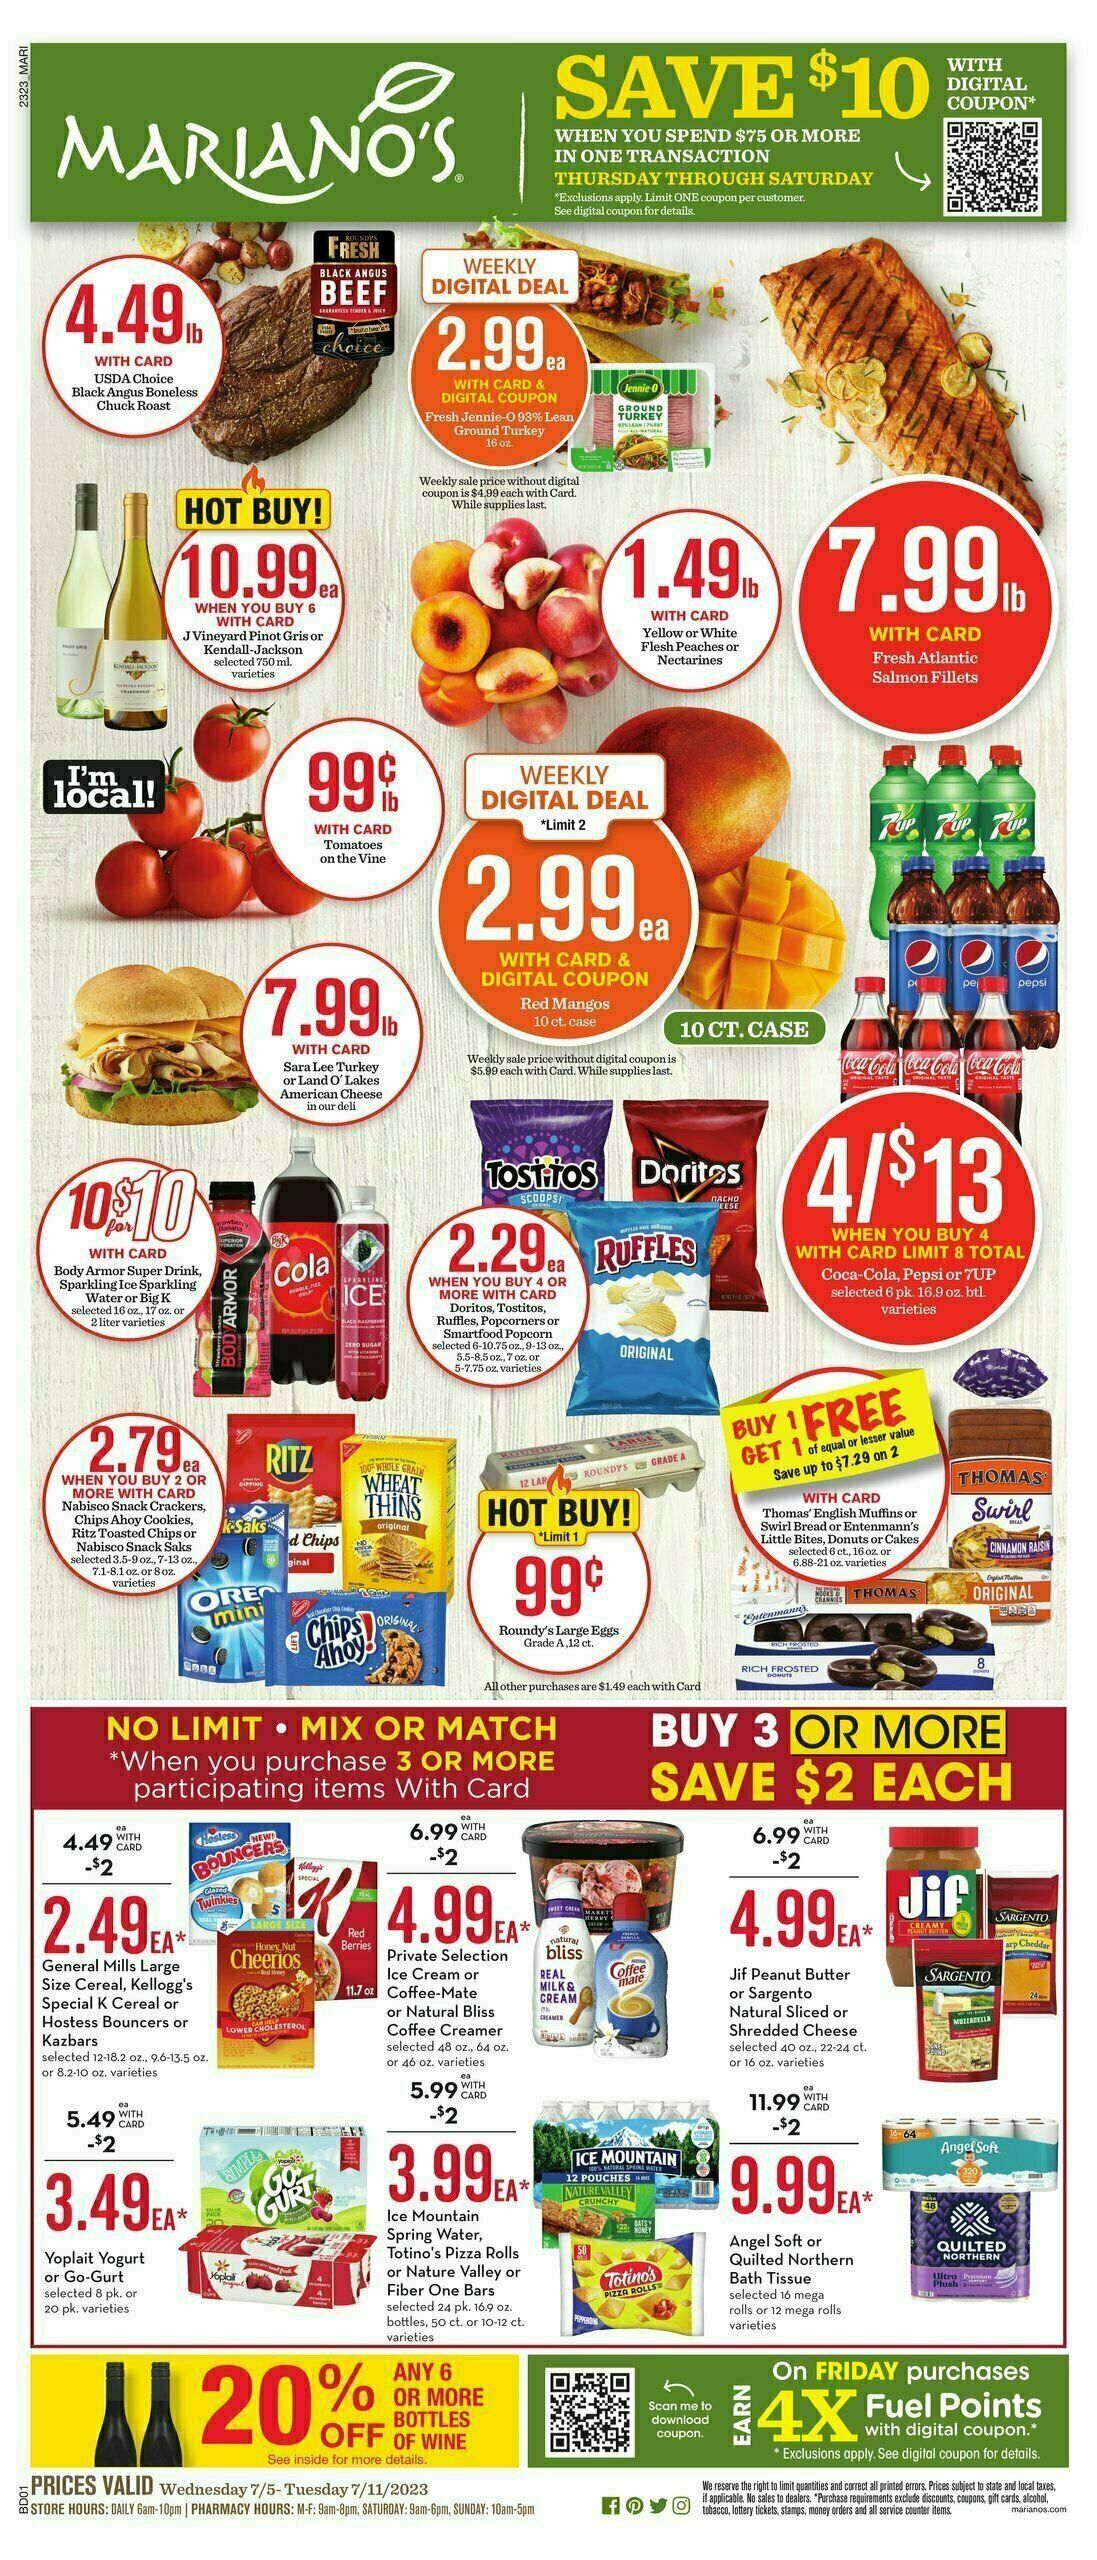 Mariano's Weekly Ad from July 5